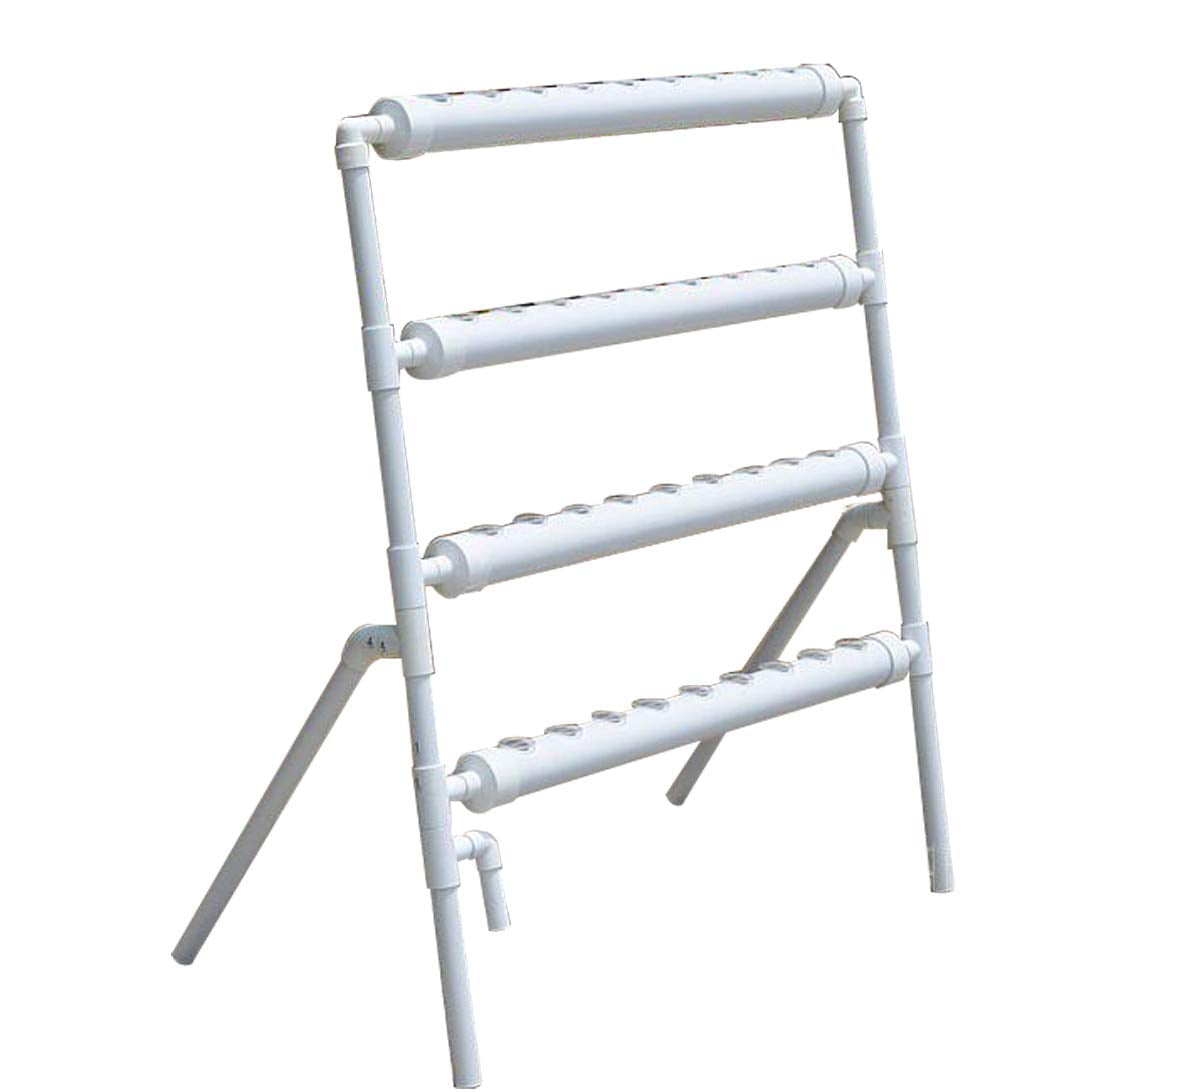 Double Side Ladder SS Holder Hydroponic 88 Sites Grow Kit Garden Growing System for sale online 